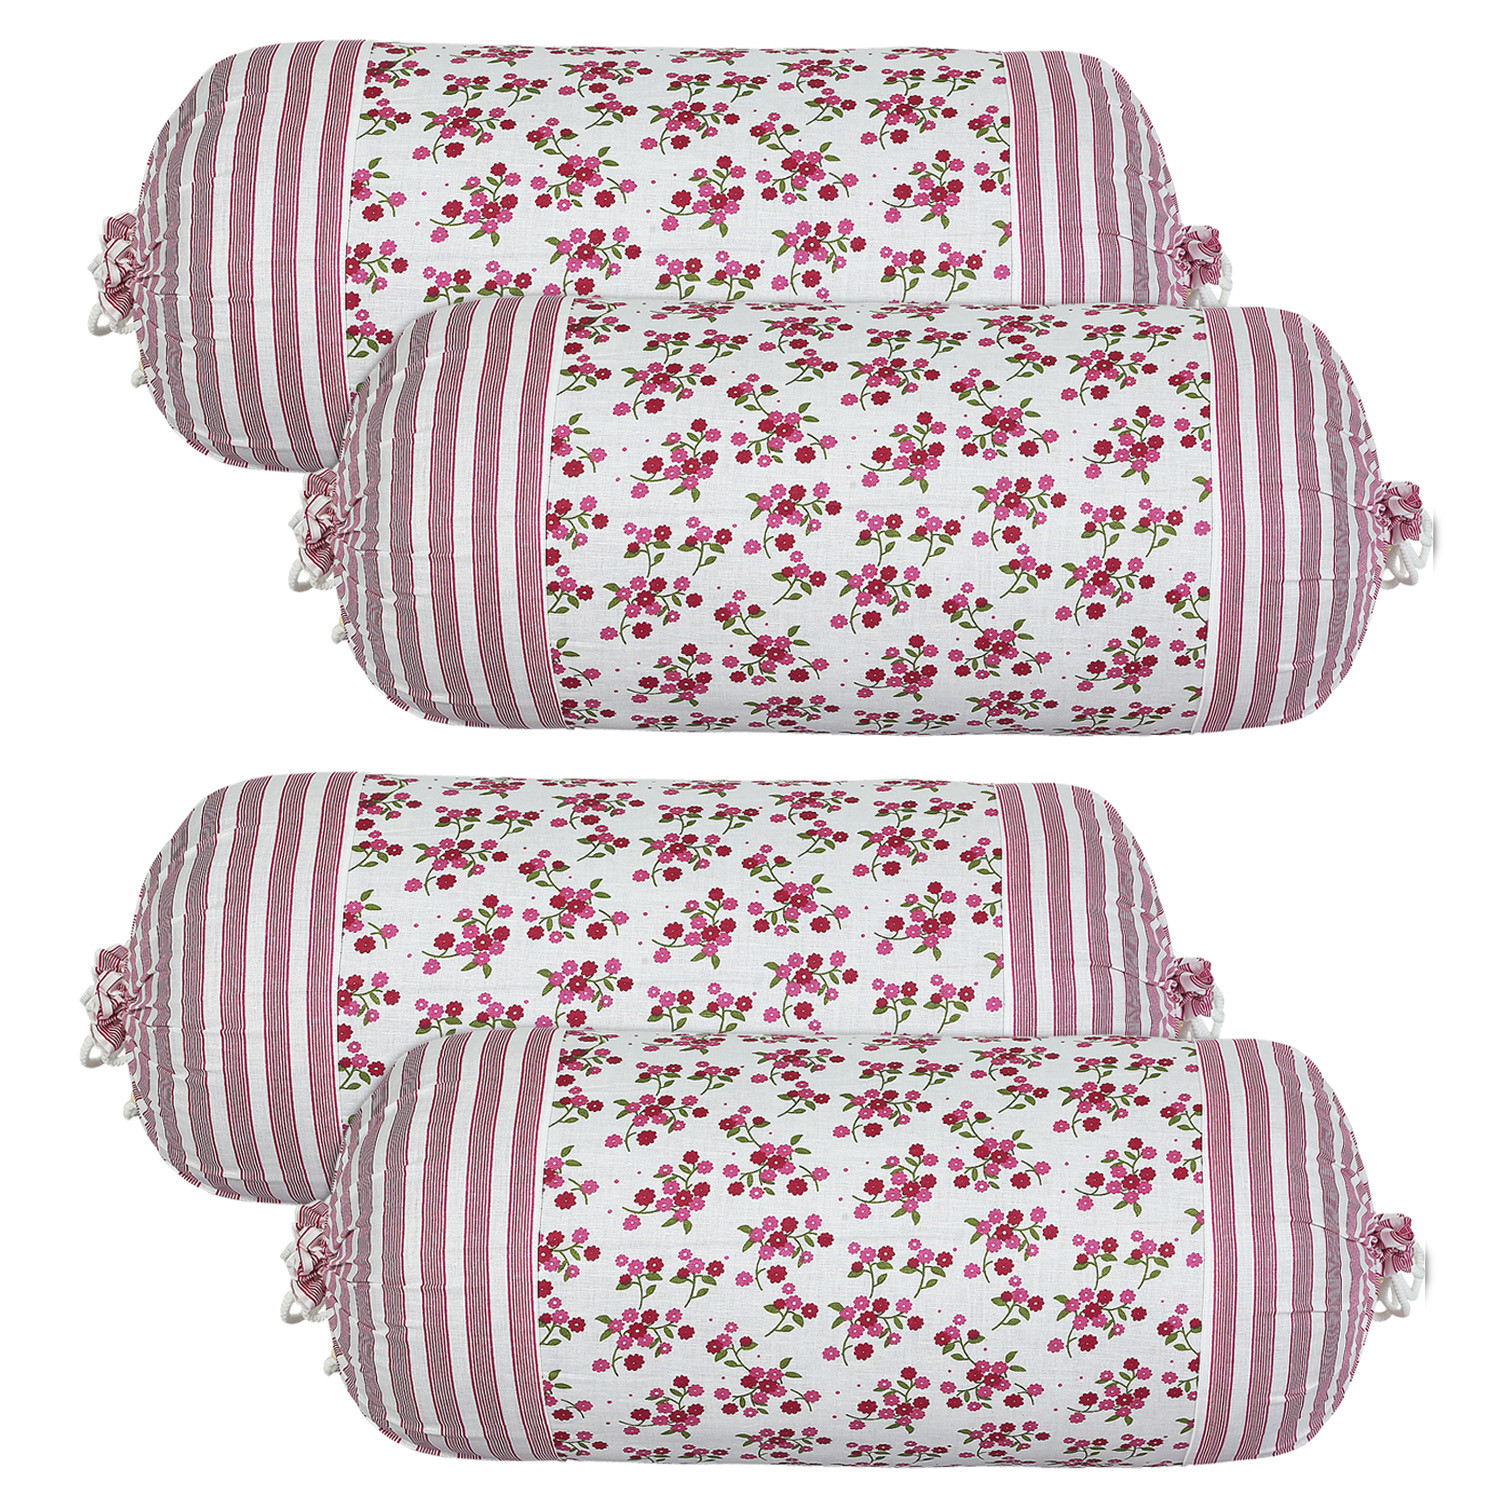 Kuber Industries Bolster Covers | Cotton Bolster Cover Set | Diwan Bolster Cover Set | Bolster Pillow Cover | Pink Flower Masand Cover | 16x32 Inch| White